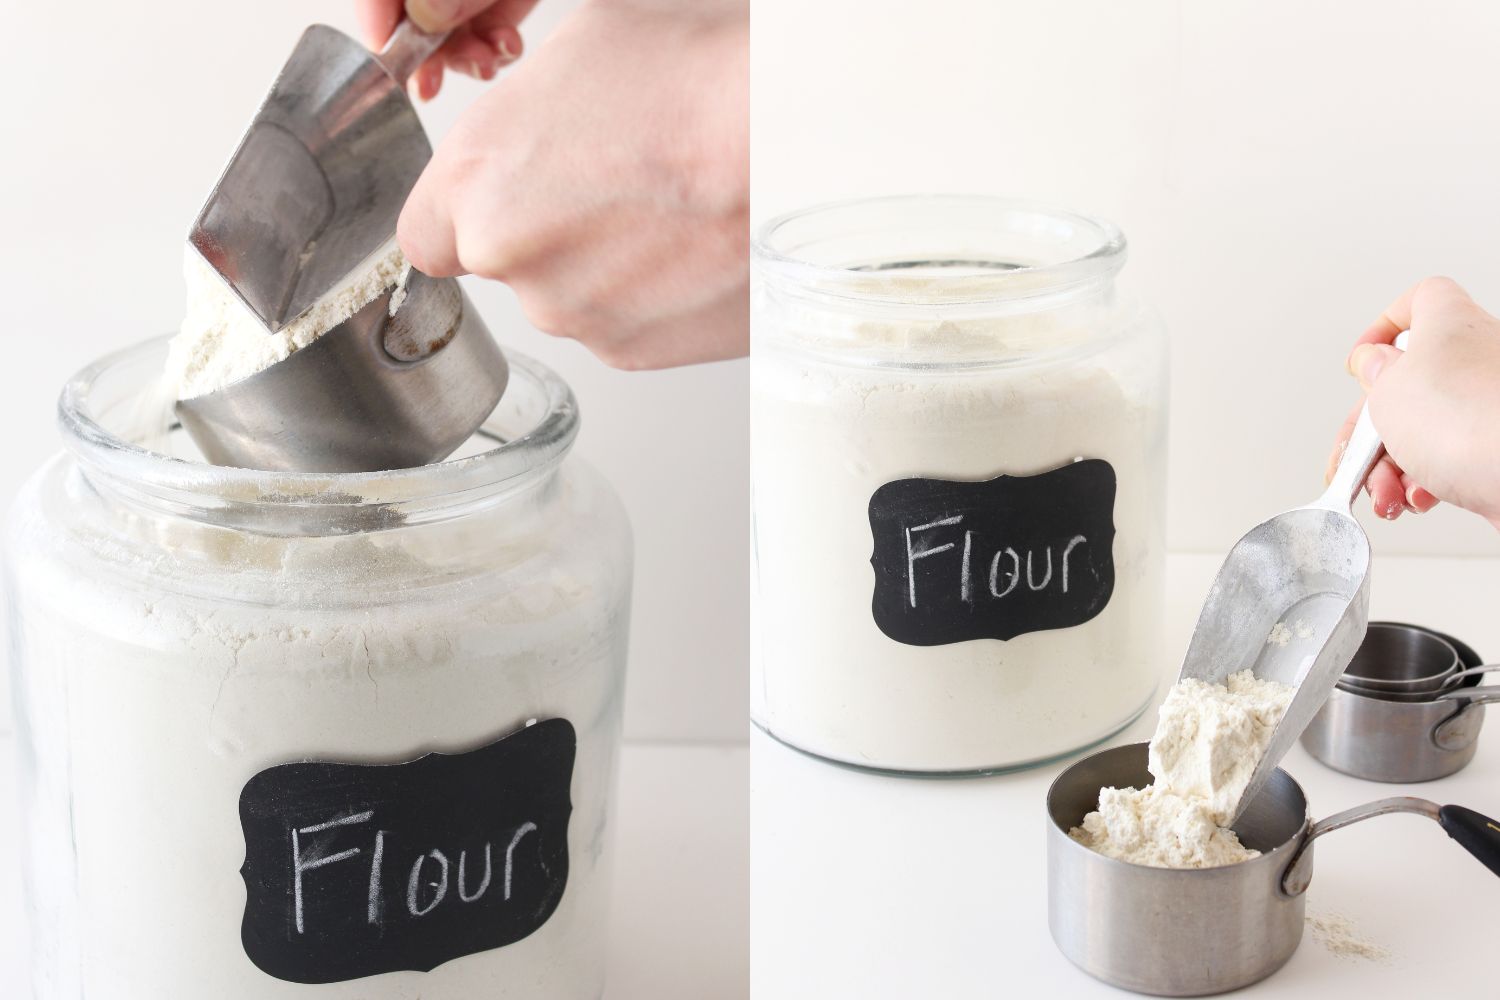 showing how to best scoop and measure flour with the scoop and level method.